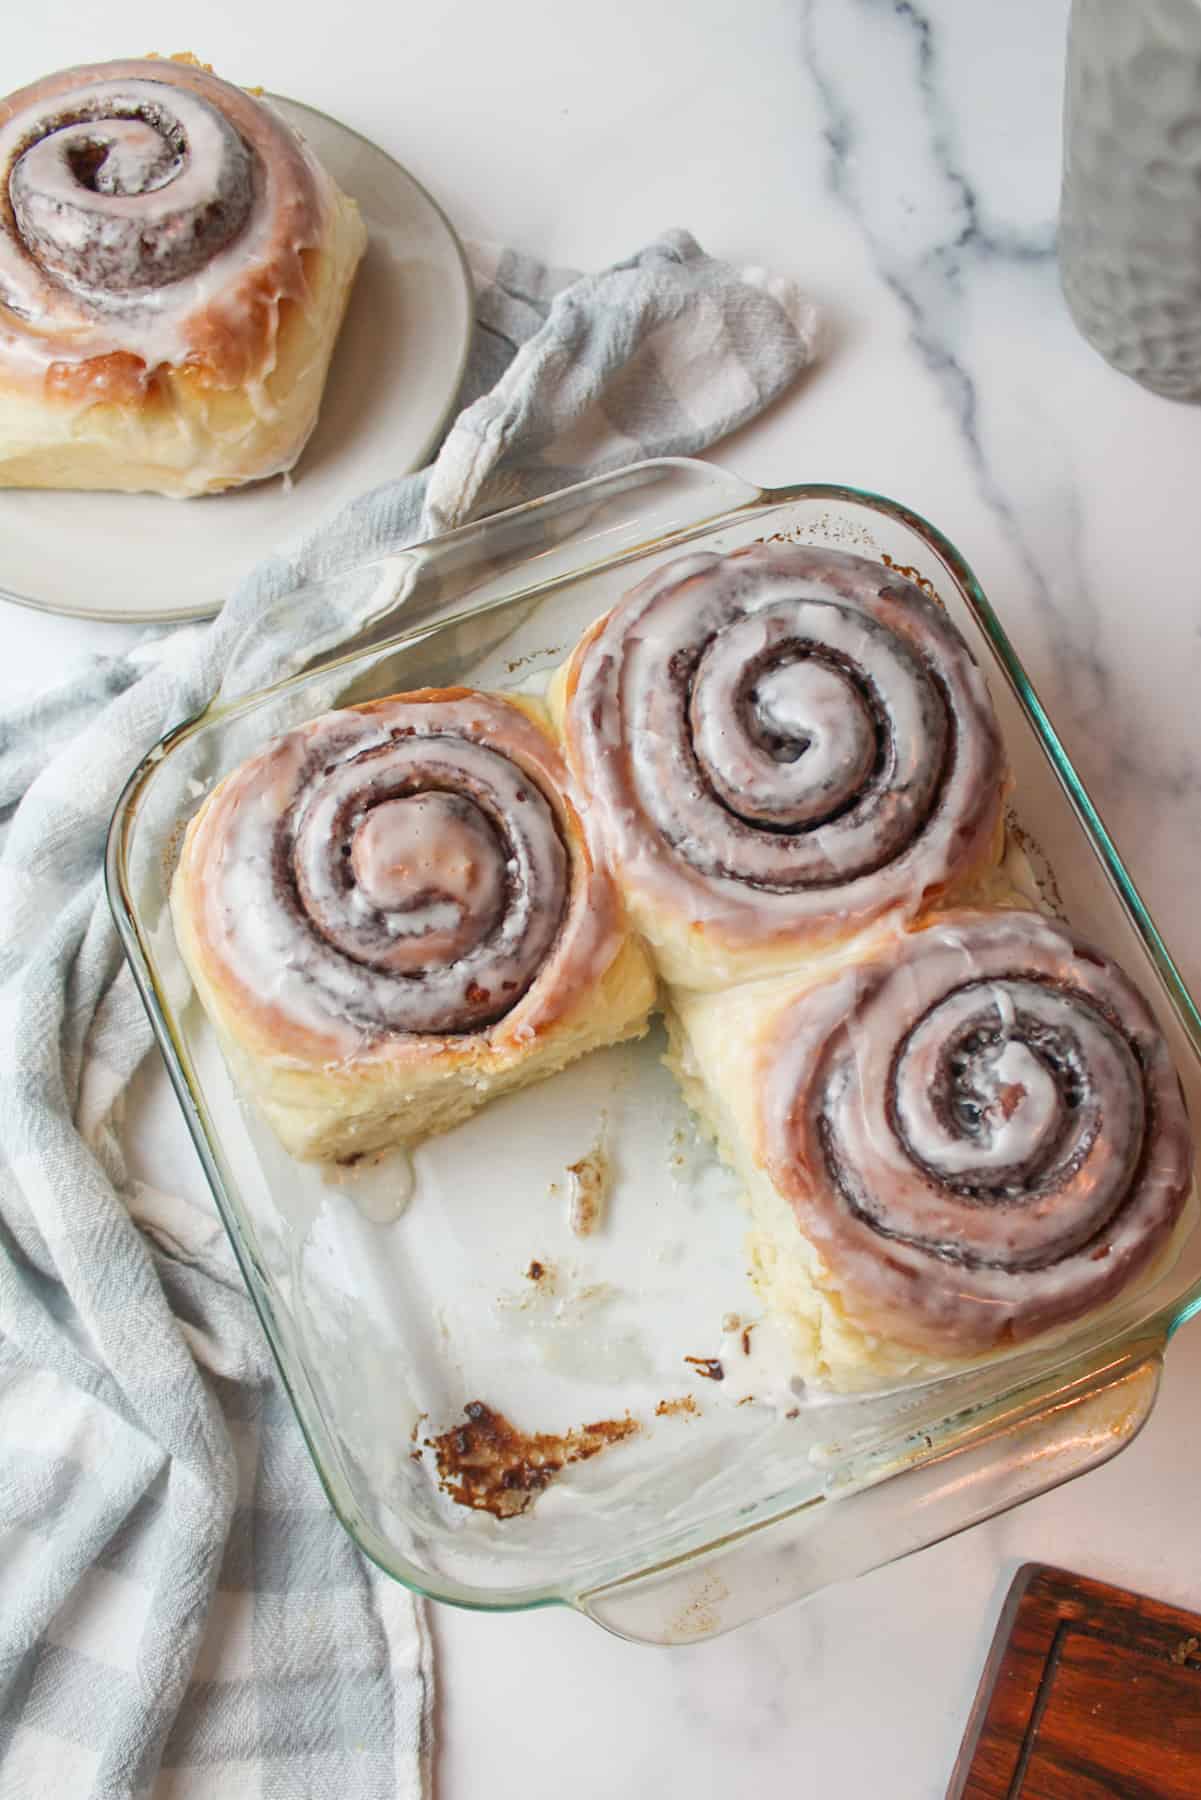 4 cinnamon rolls with icing, 3 of them are in a baking dish and one is on a plate to the side.